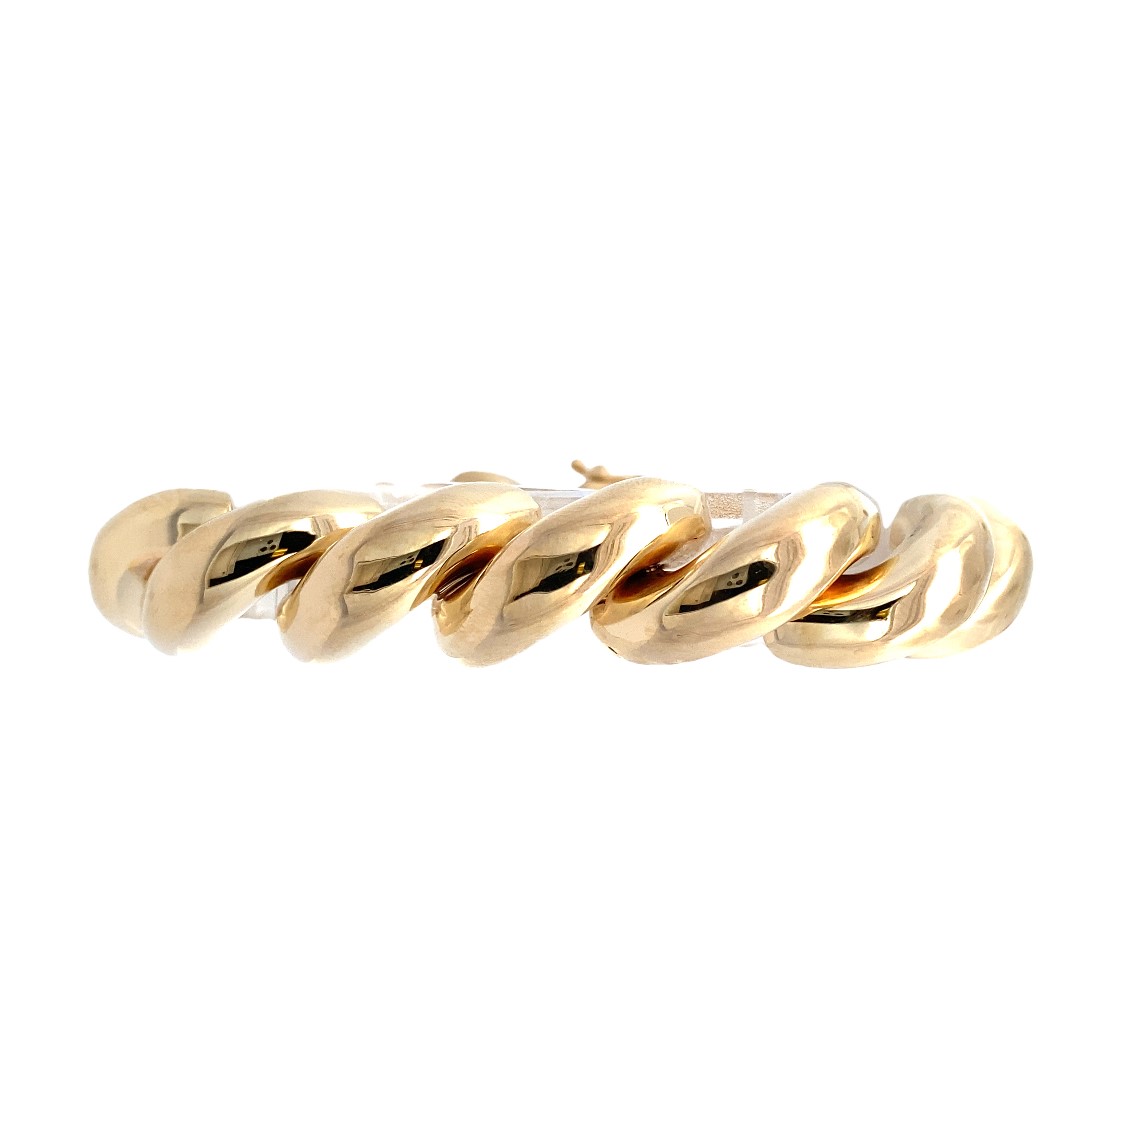 Estate 14 Karat Yellow Gold San Marco Bracelet Measuring 7.5 Inches Long And And 14 mm Wide